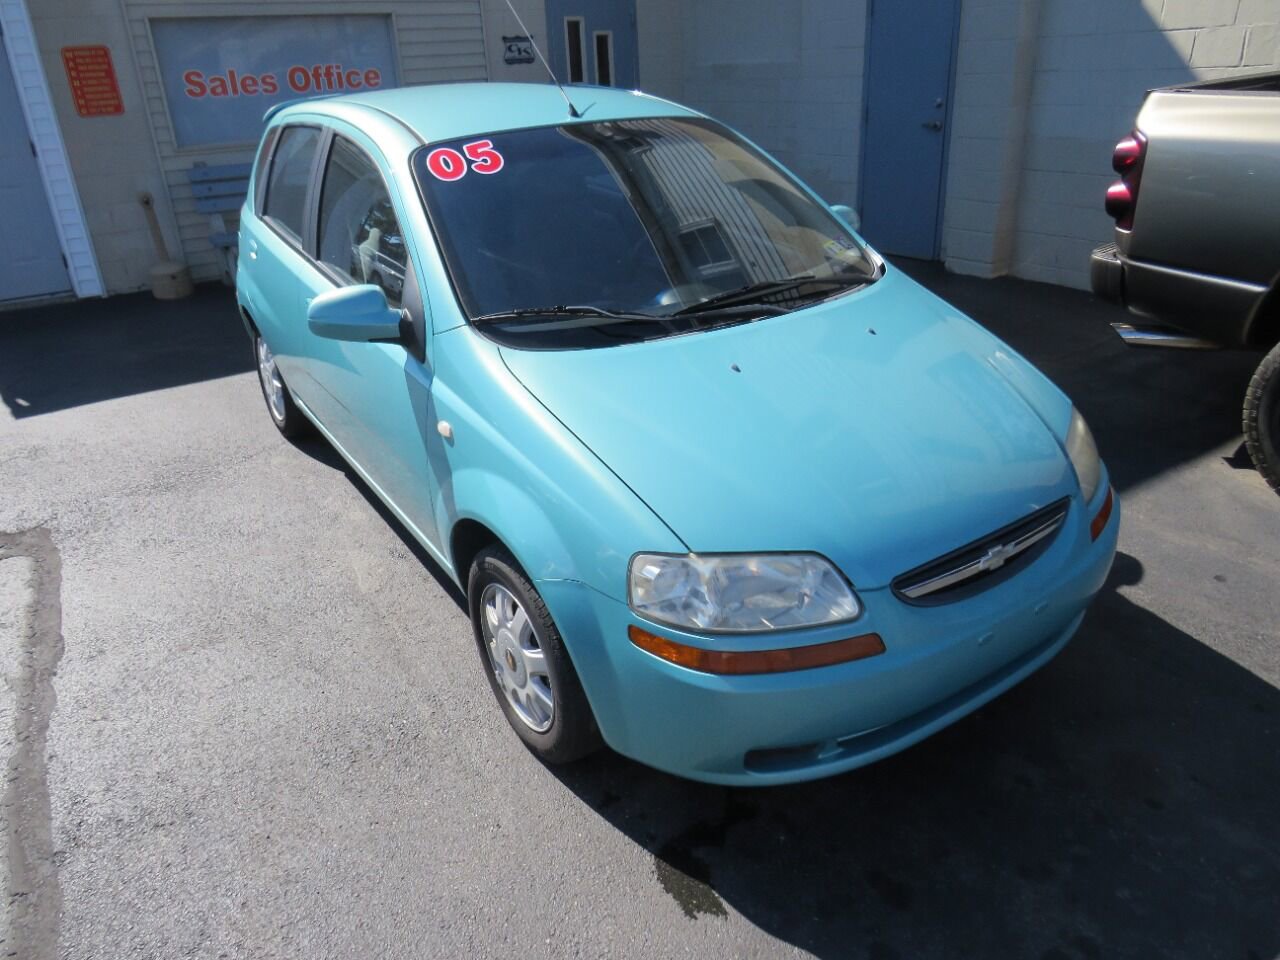 Used 2005 Chevrolet Aveo for Sale Right Now - Autotrader